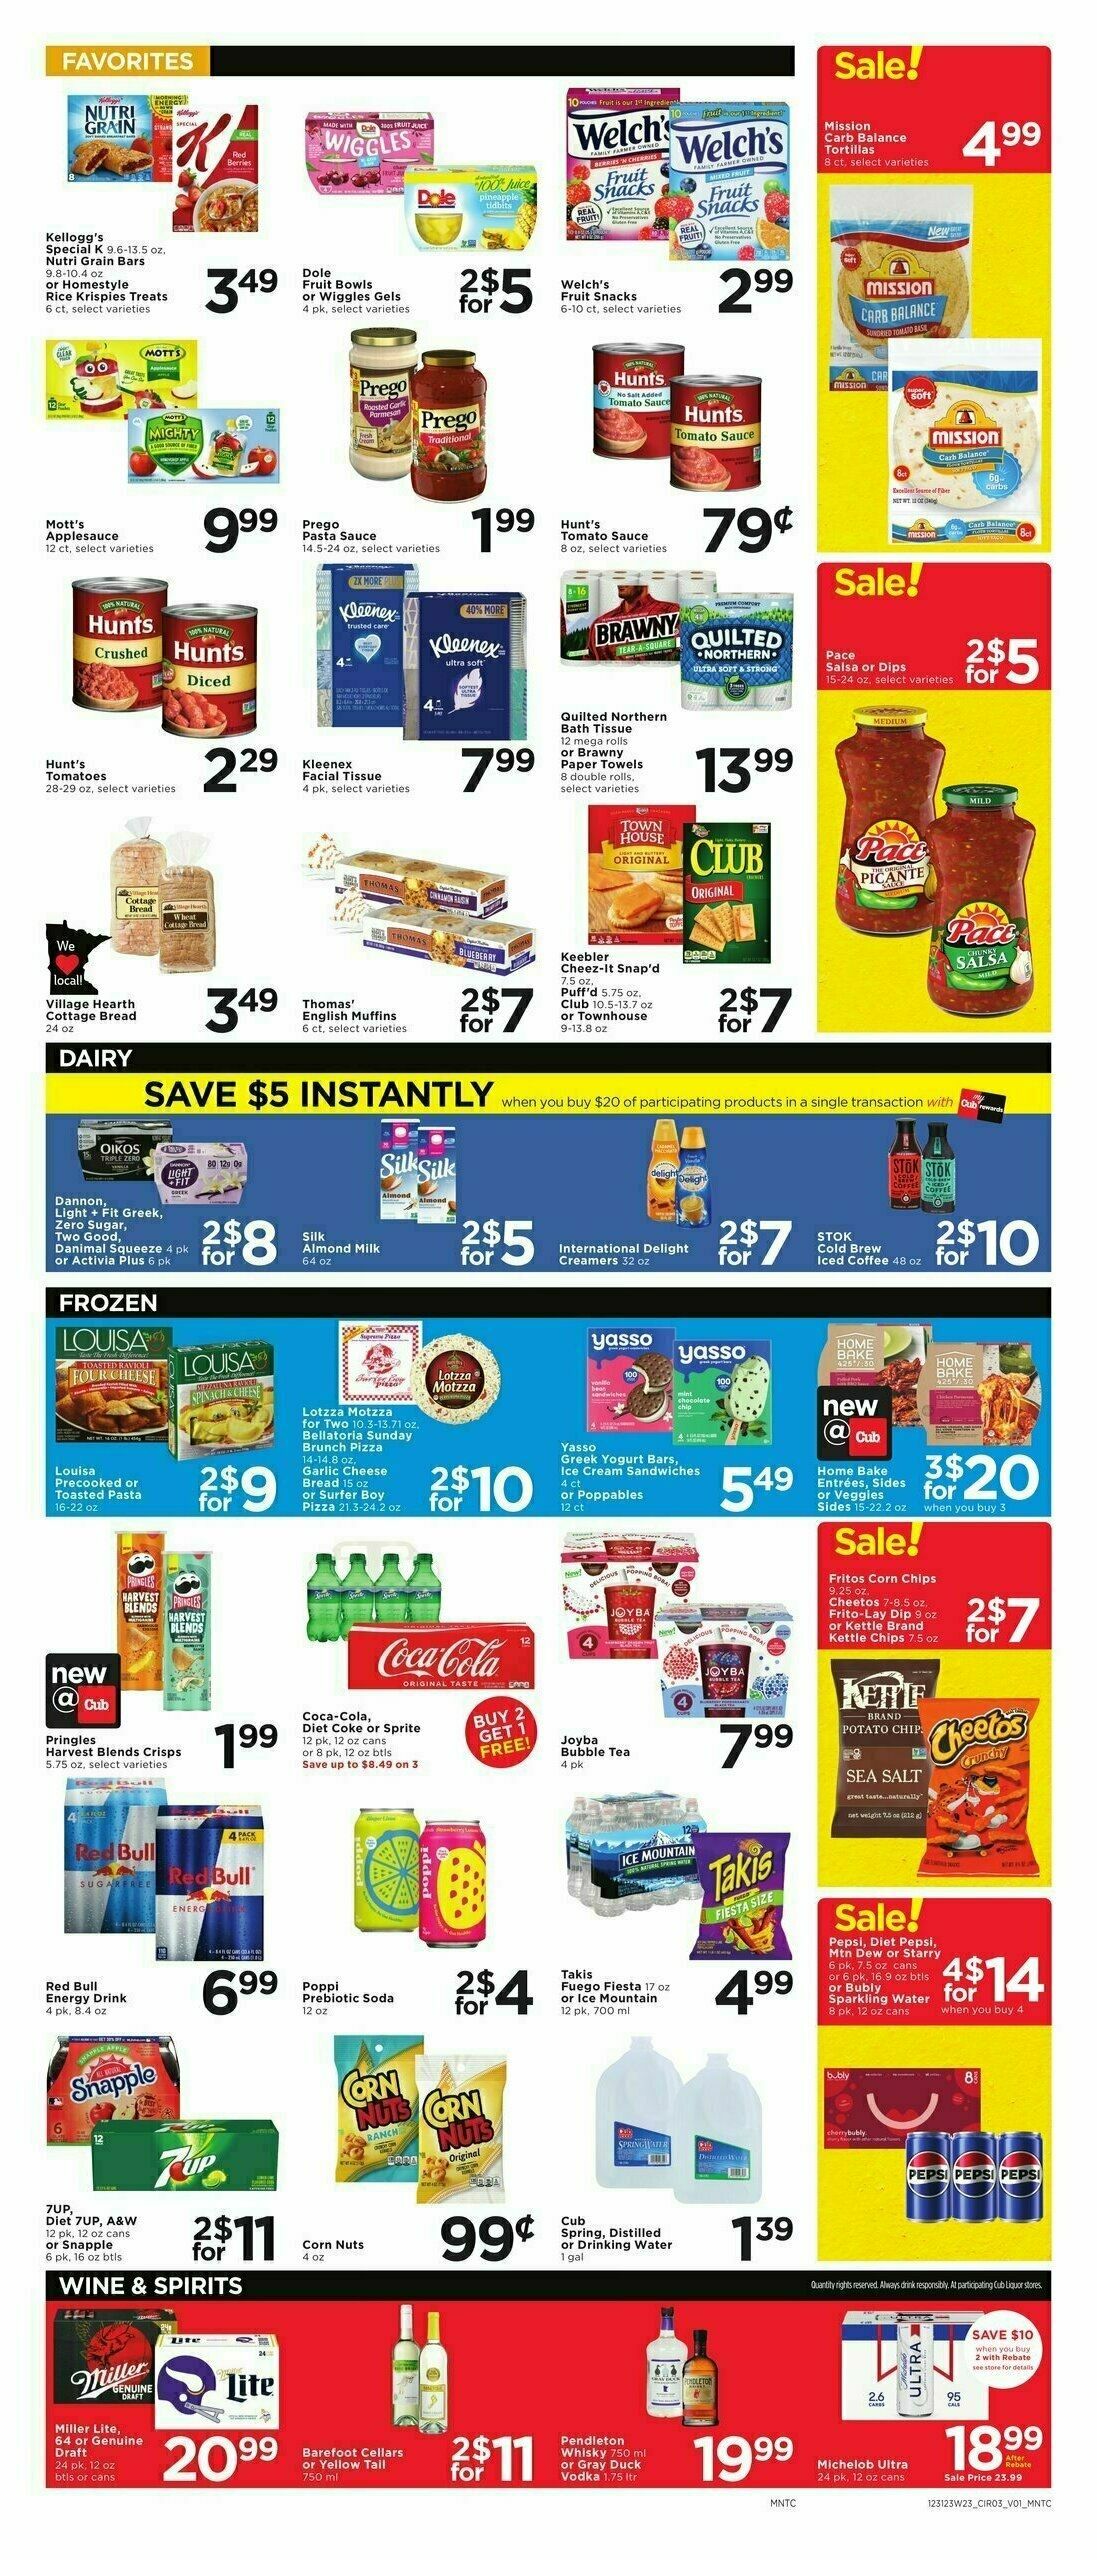 Cub Foods Weekly Ad from December 31